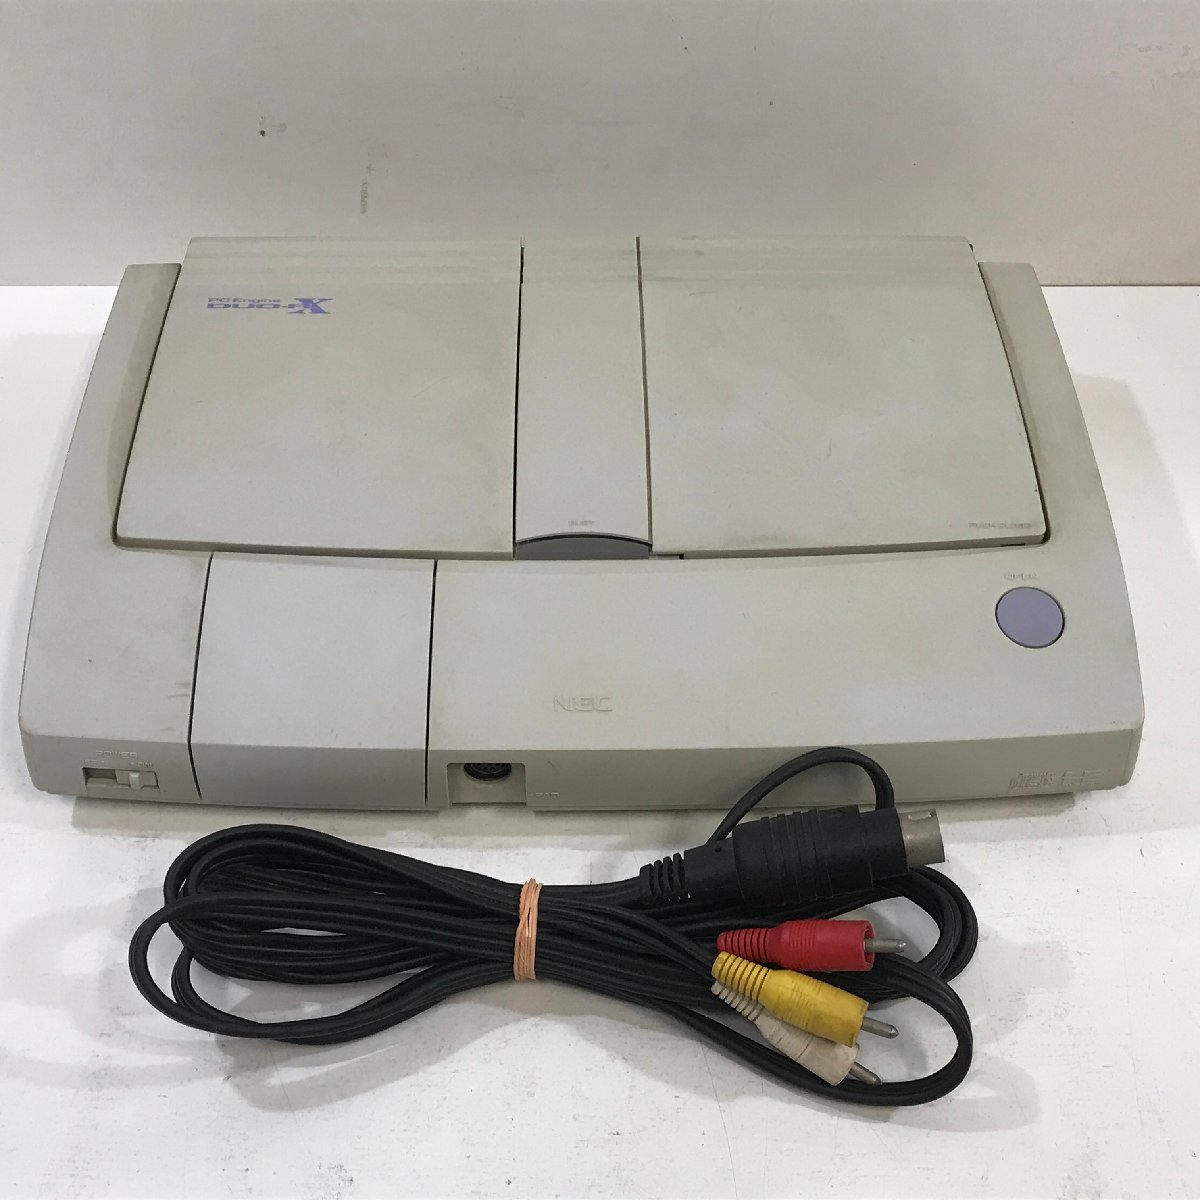 PC Engine DUO-RX